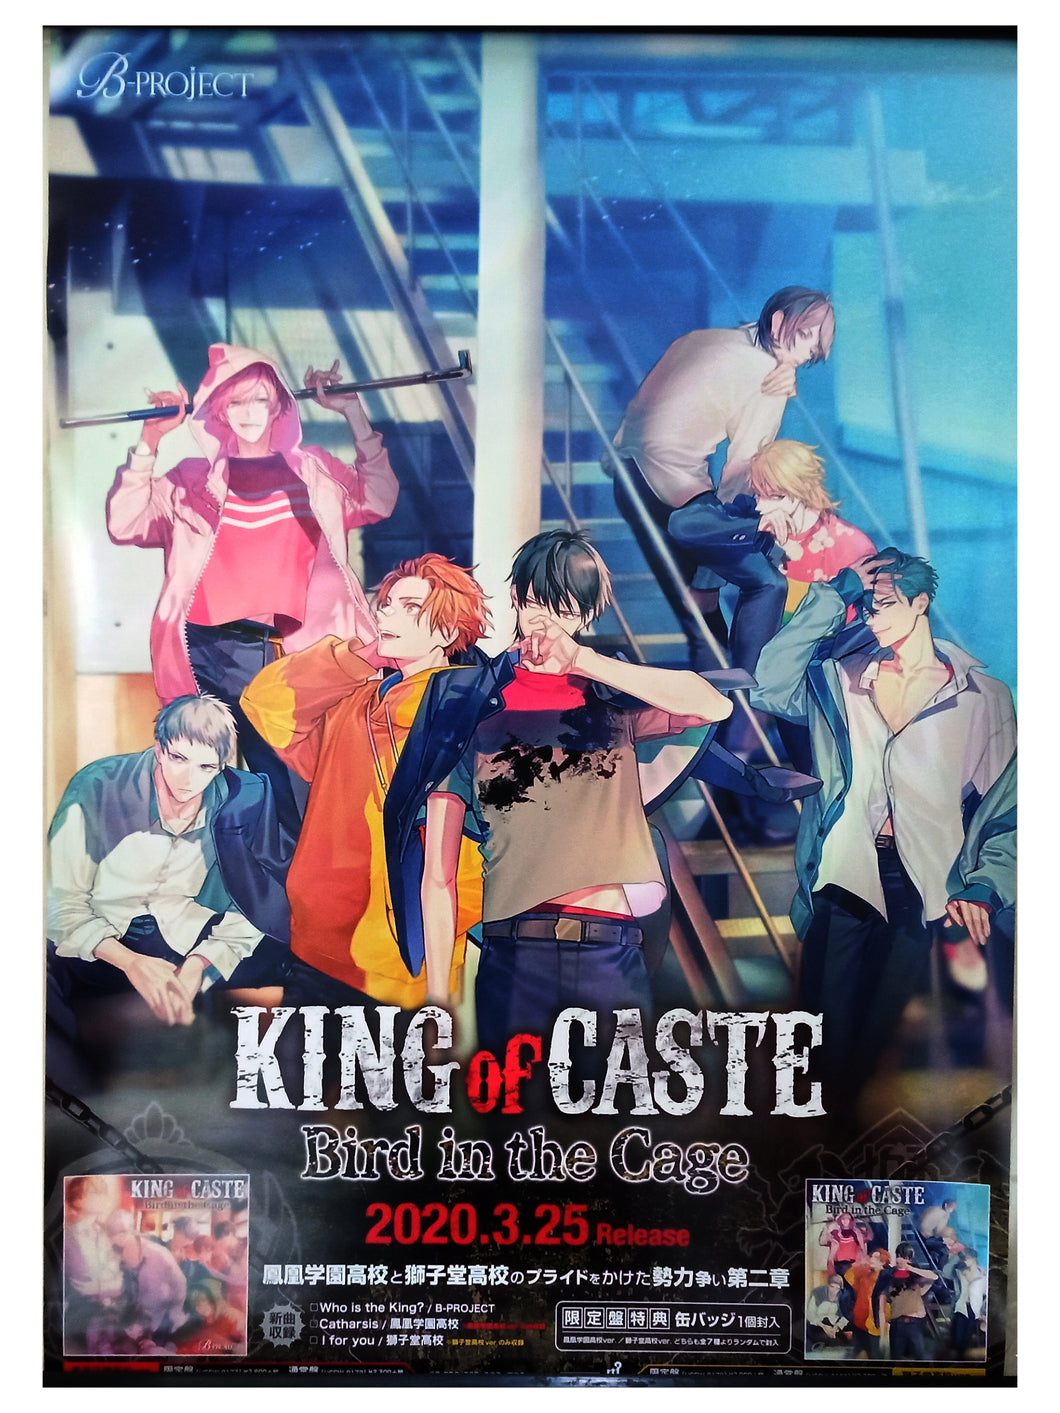 B Project: KING of CASTE 〜Bird in the Cage〜 Promotional B2 Poster